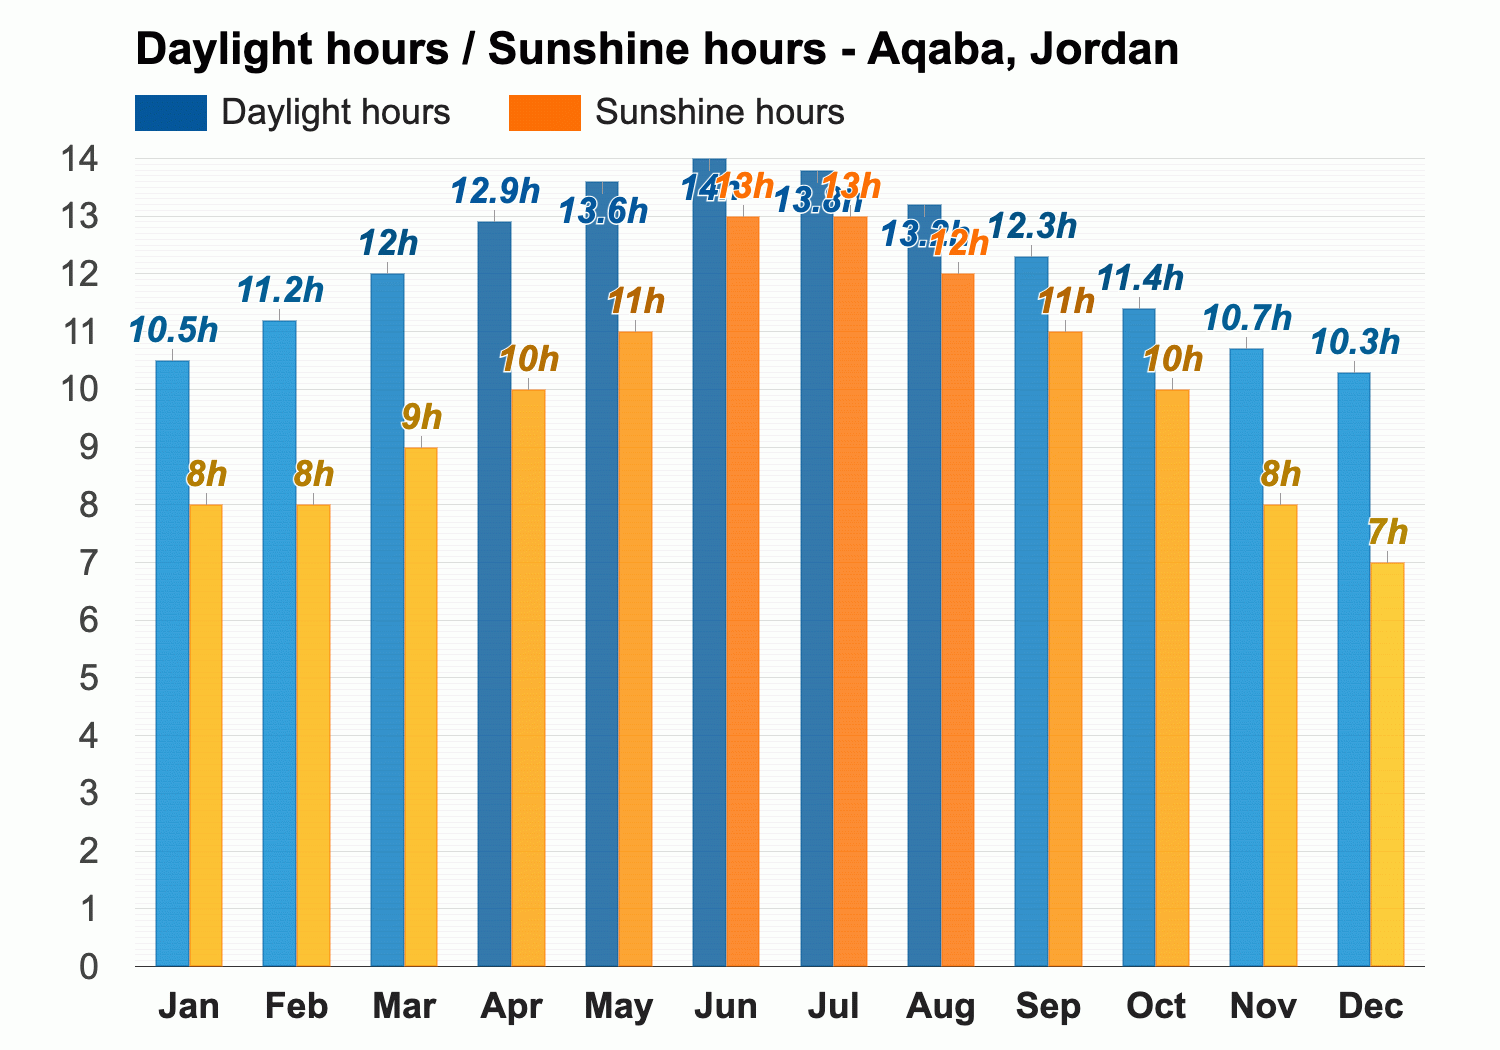 Aqaba, Jordan - December weather forecast and climate information | Weather